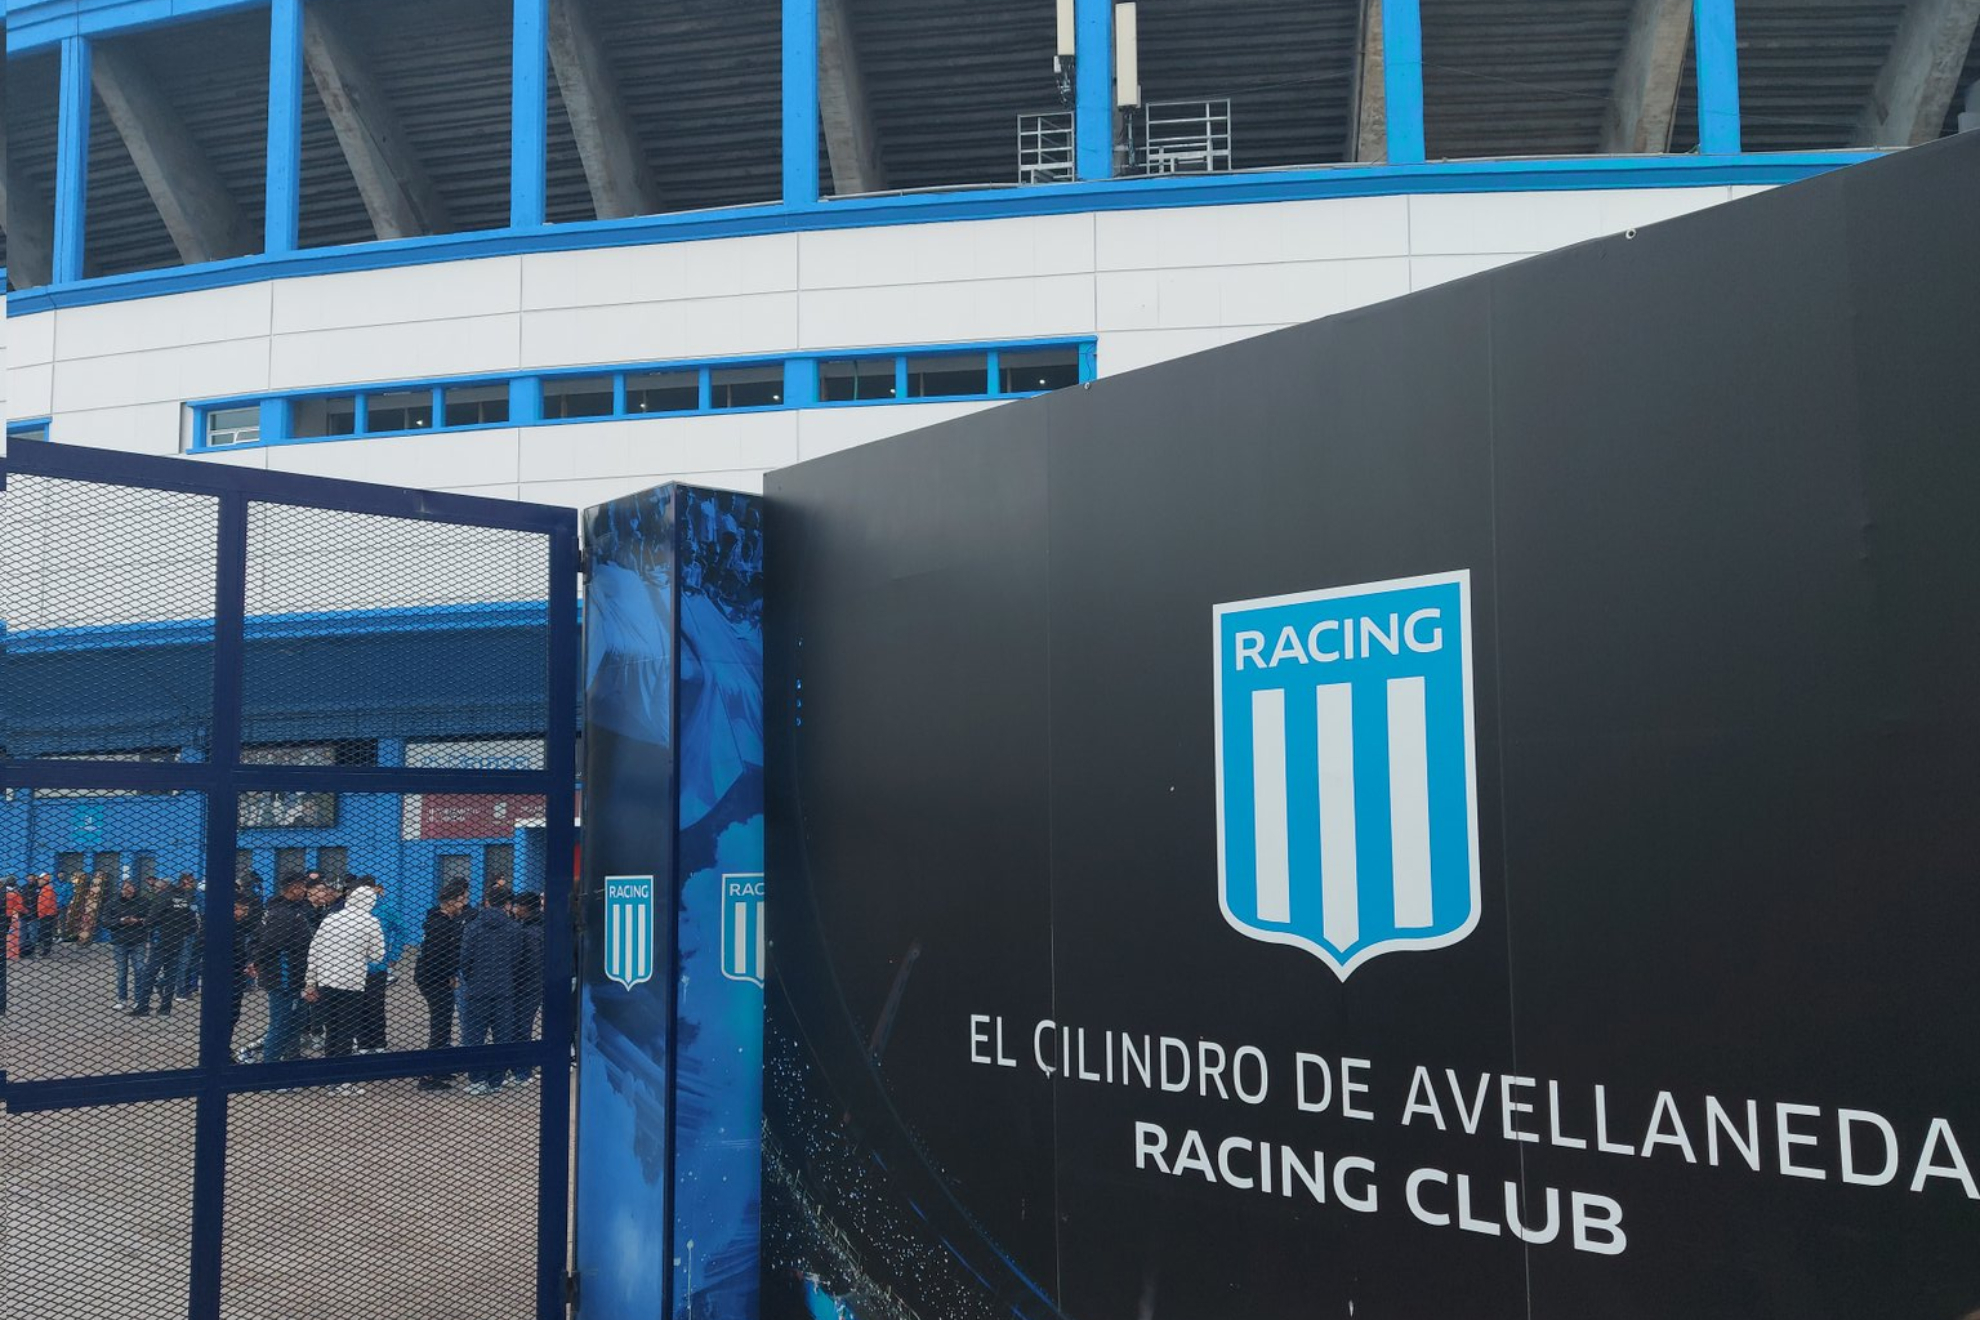 Fan Tokens: Racing de Avellaneda make a dream come true by offering a  dedicated fan an opportunity to attend a match at El Cilindro